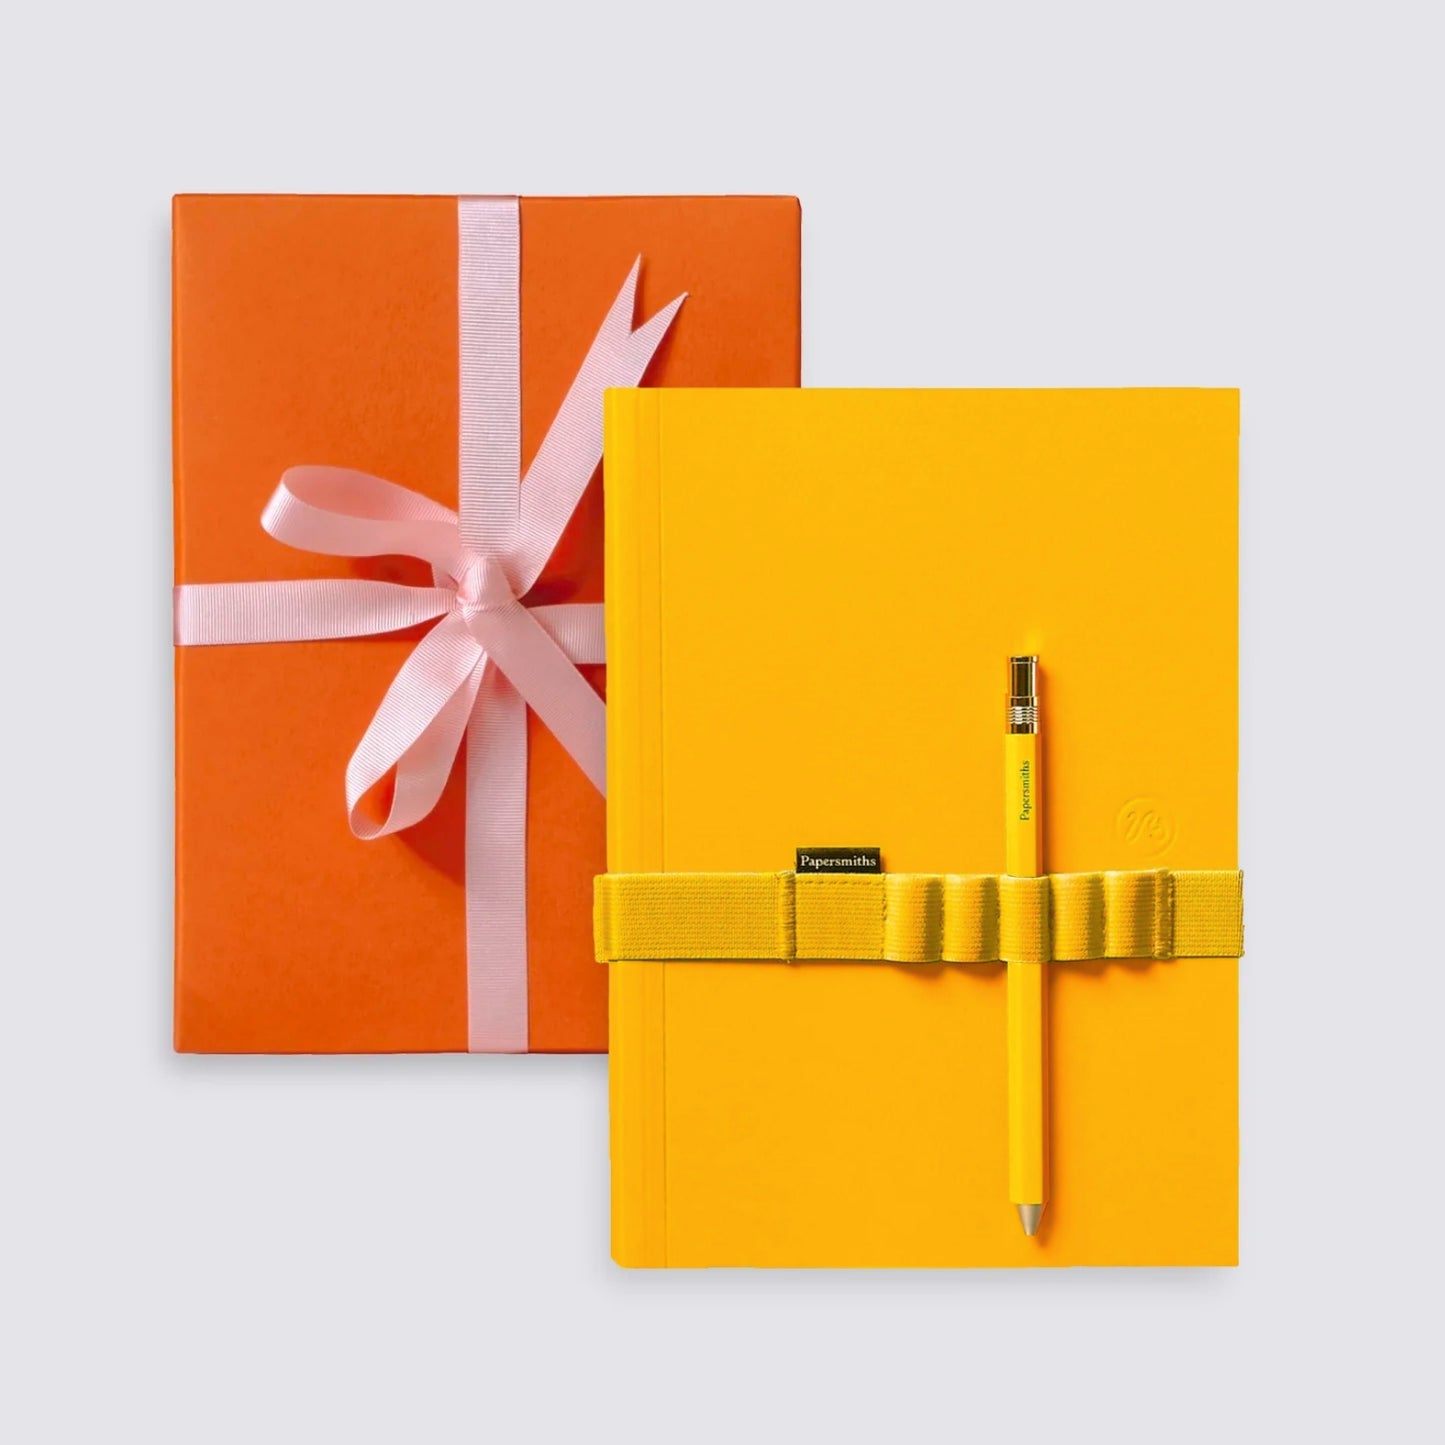 Yolk Notebook, Pen and Band Trio - Everyday Pen / Plain Paper